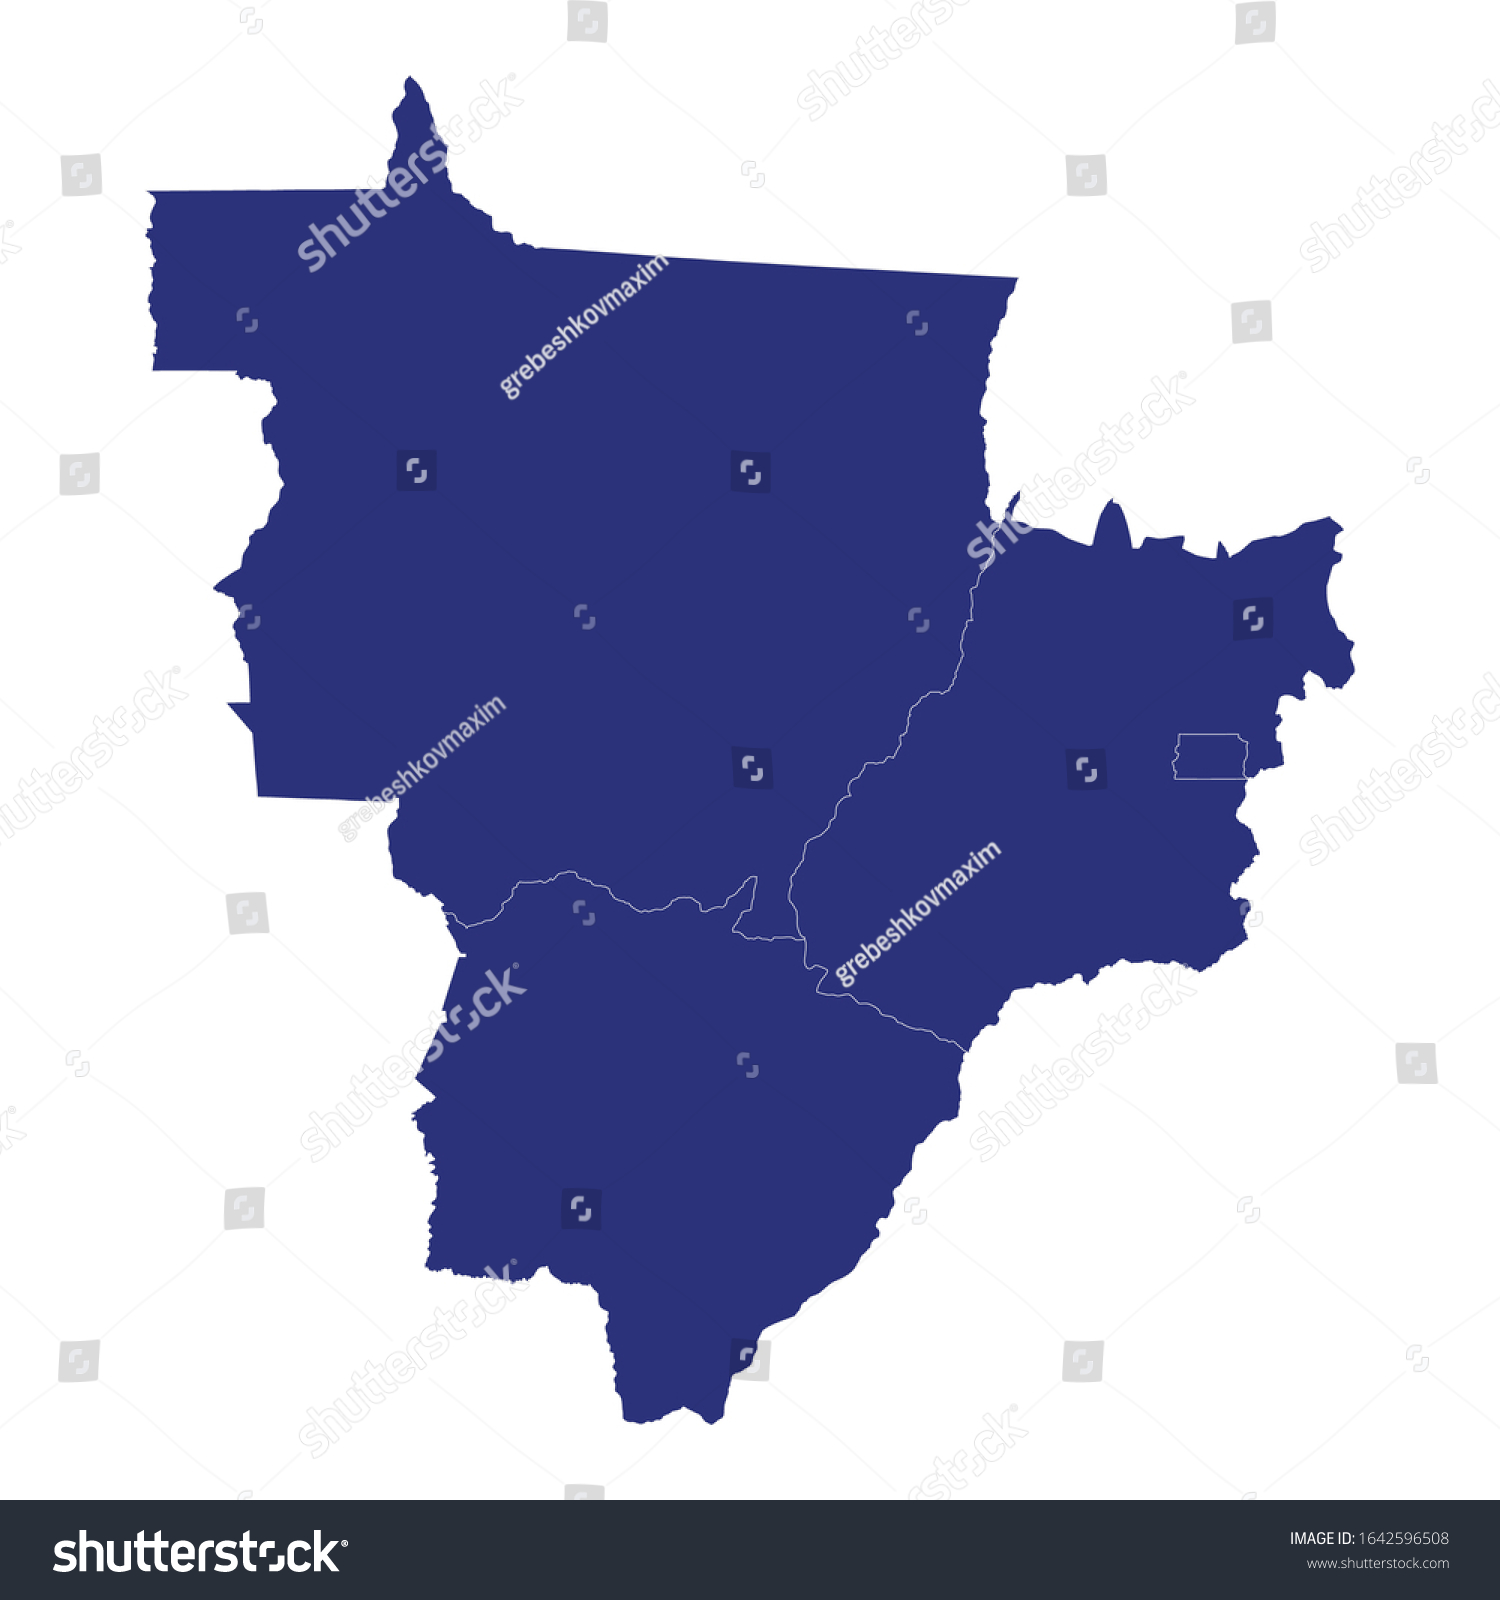 High Quality Map Centralwest Region Brazil Royalty Free Stock Image